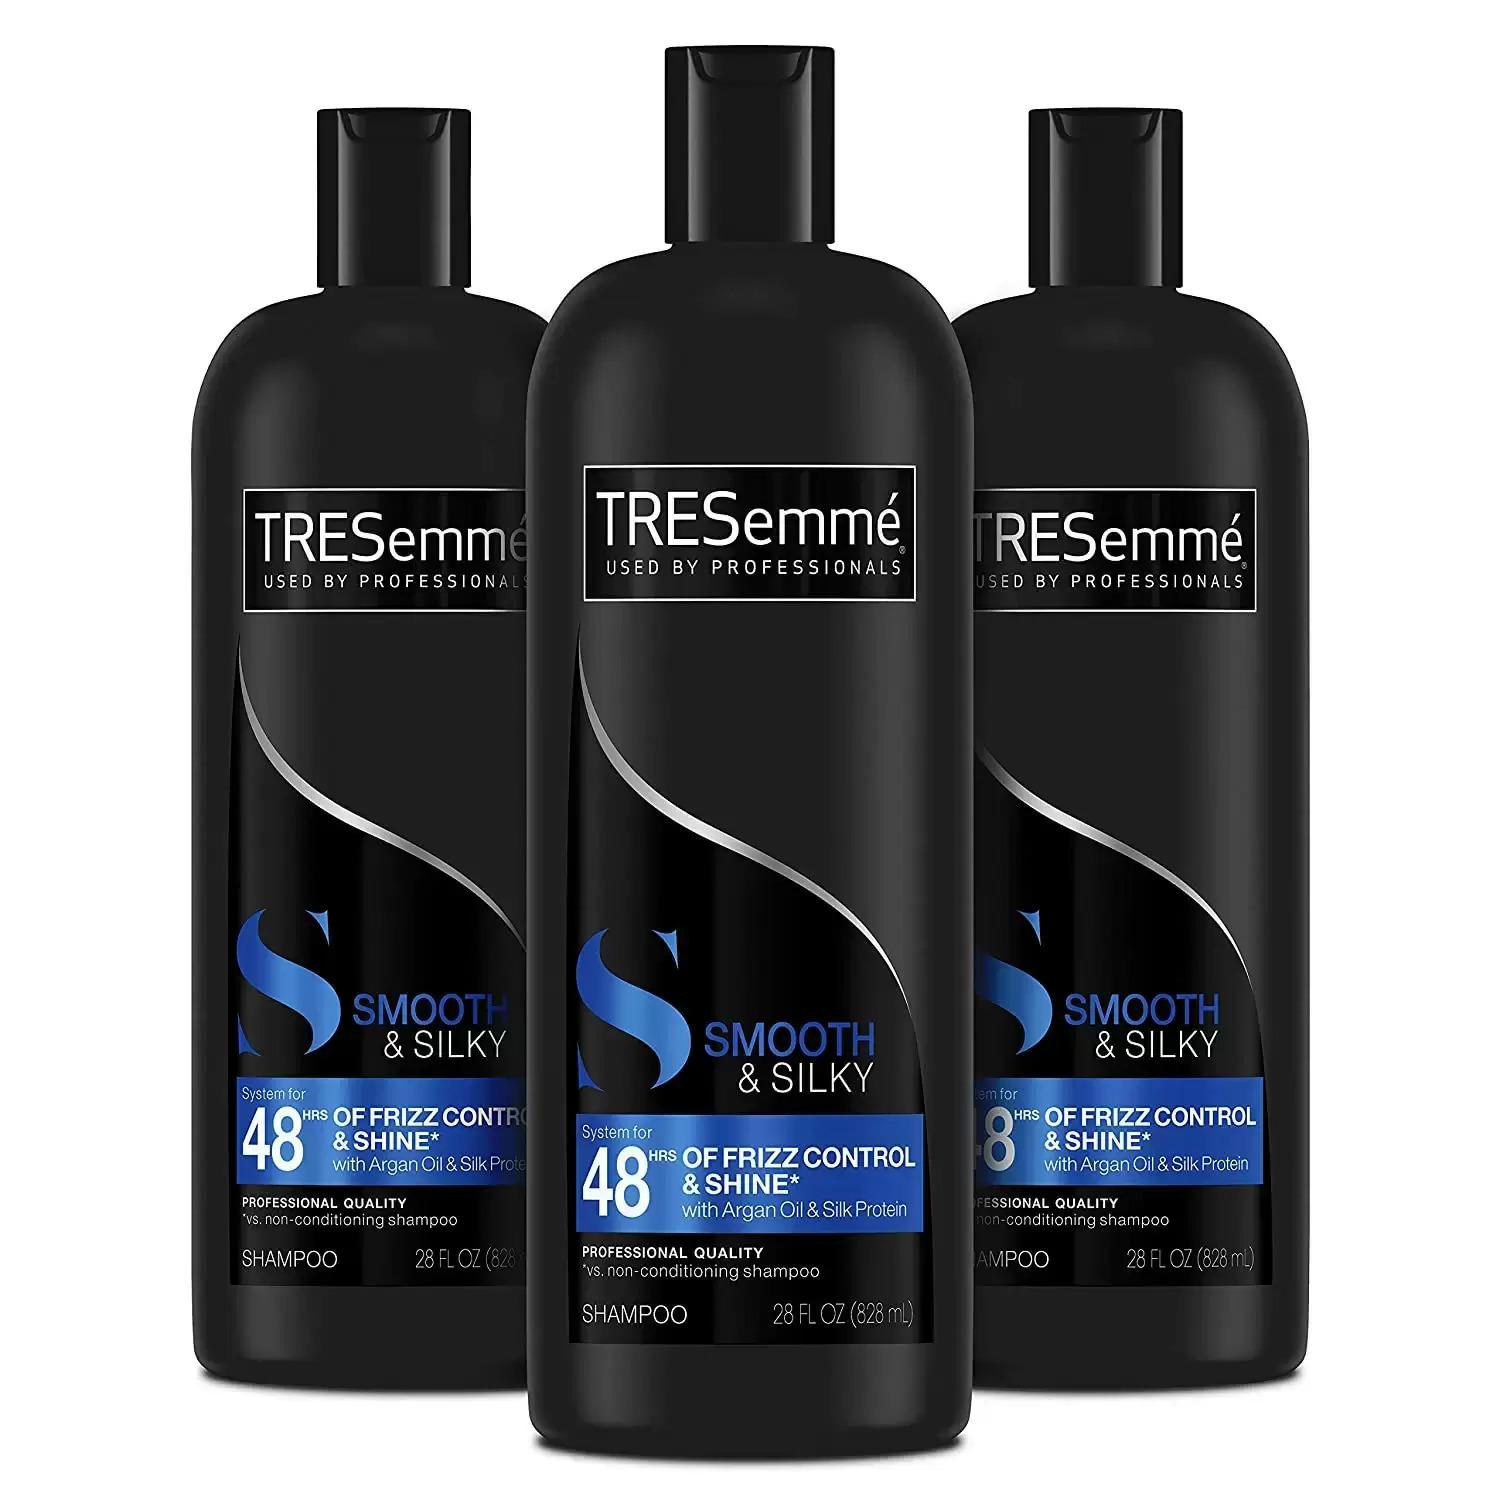 3 TRESemme Smooth and Silky Shampoo for $5.84